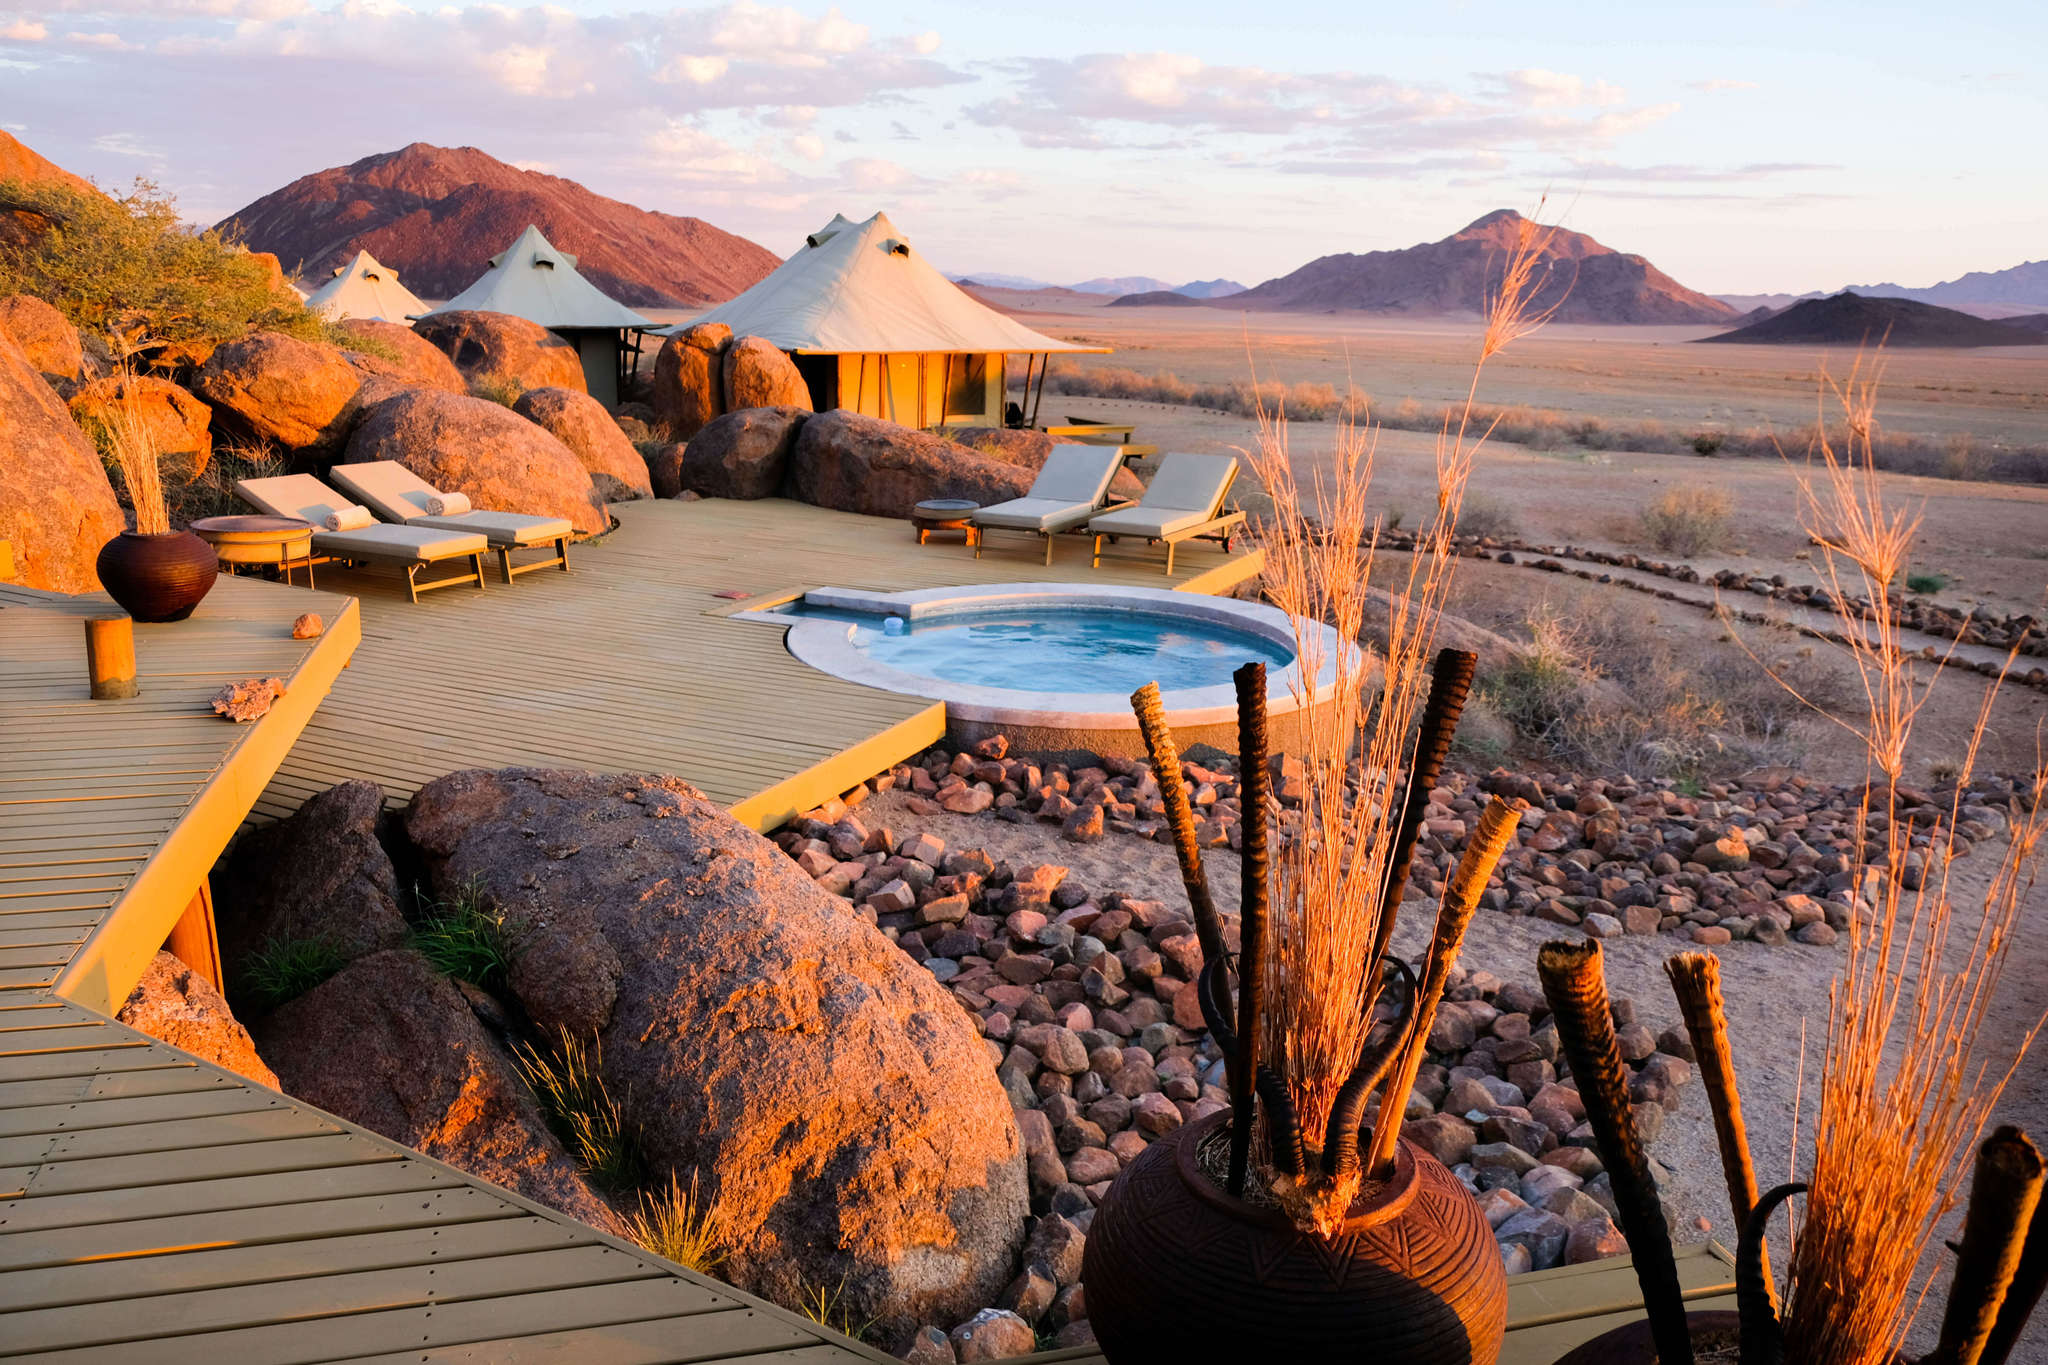 best time to visit namibia for safari